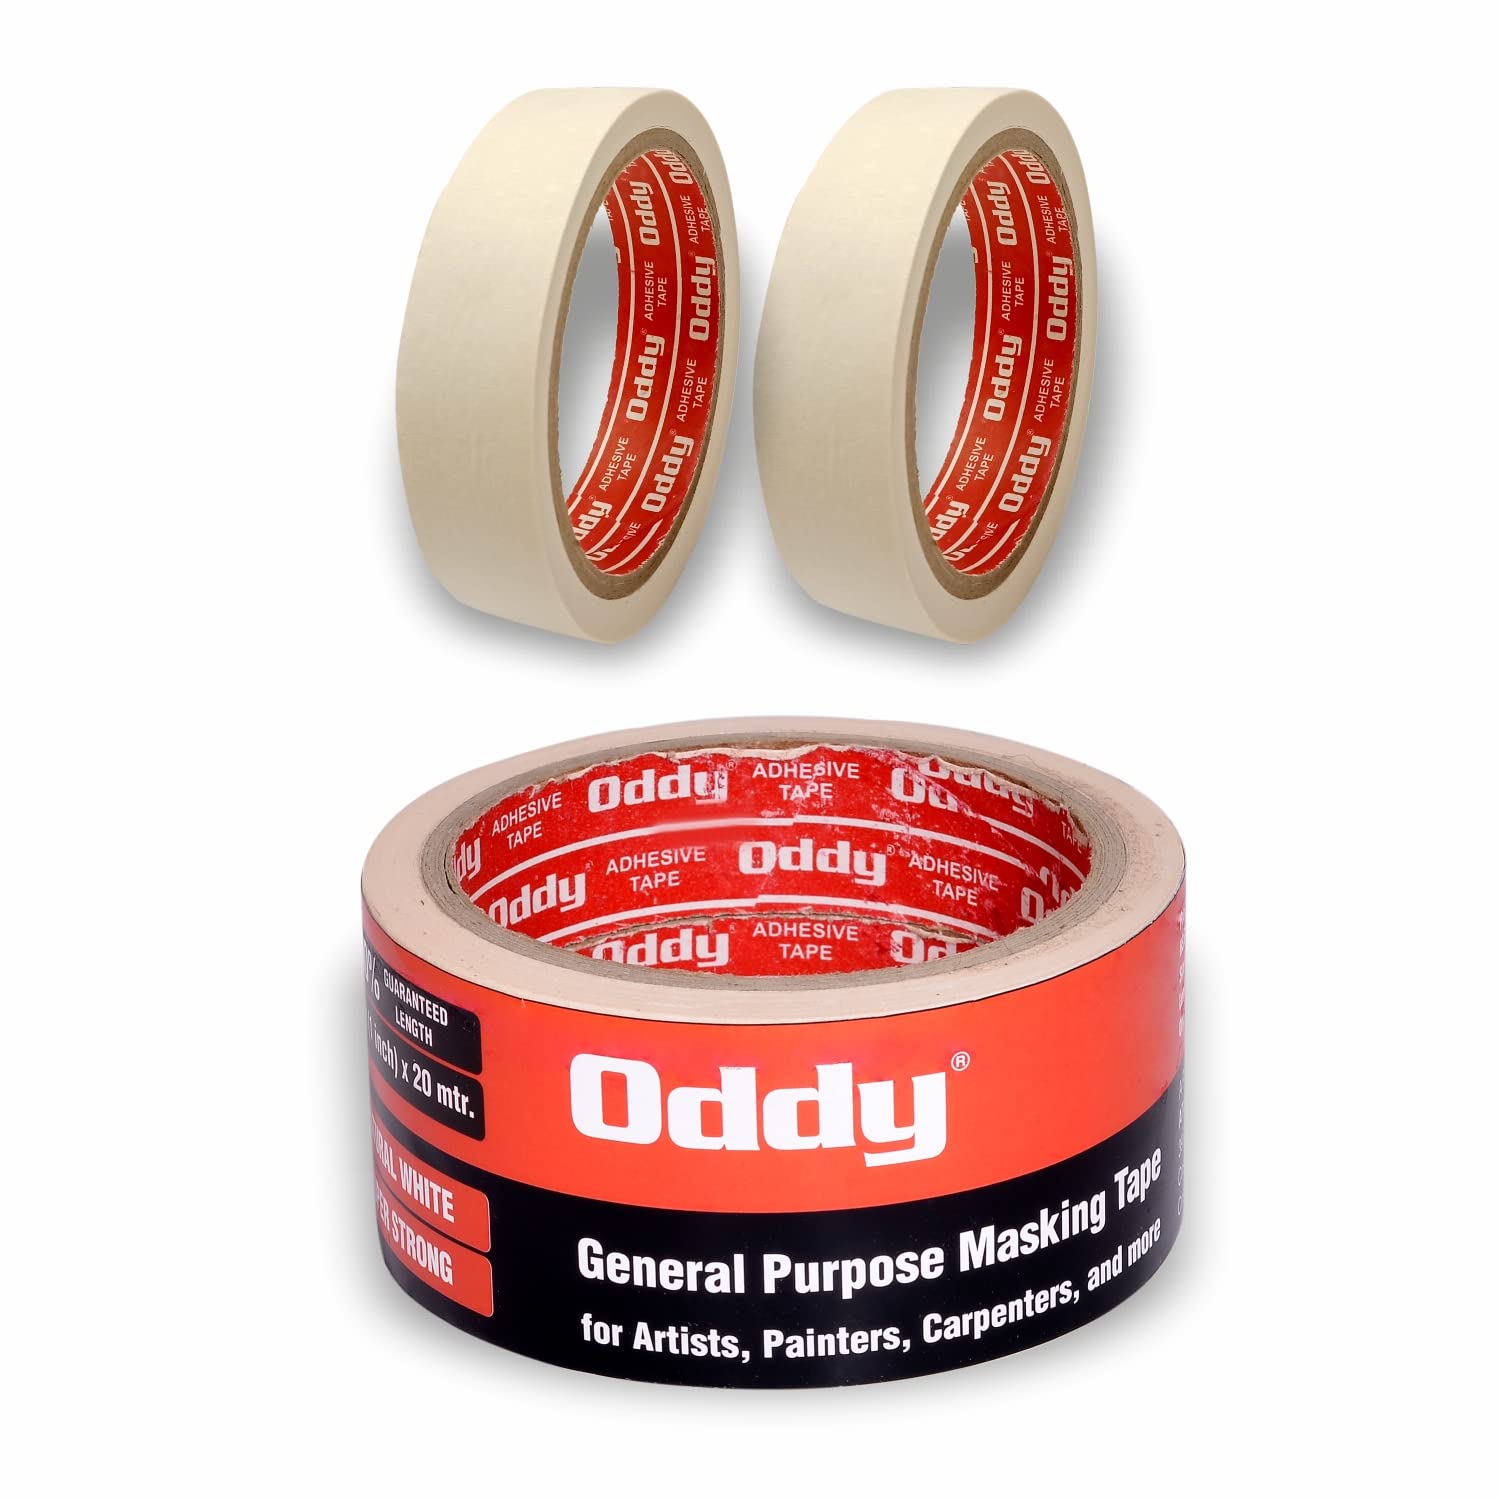 Oddy Masking Tape for Painting for Artists, Painters & Carpenters | 24mm X 20m Pack of 2 Rolls | Paper Tape for Acrylic Painting, Water Colour, Pastels Drawing, Wall Painting